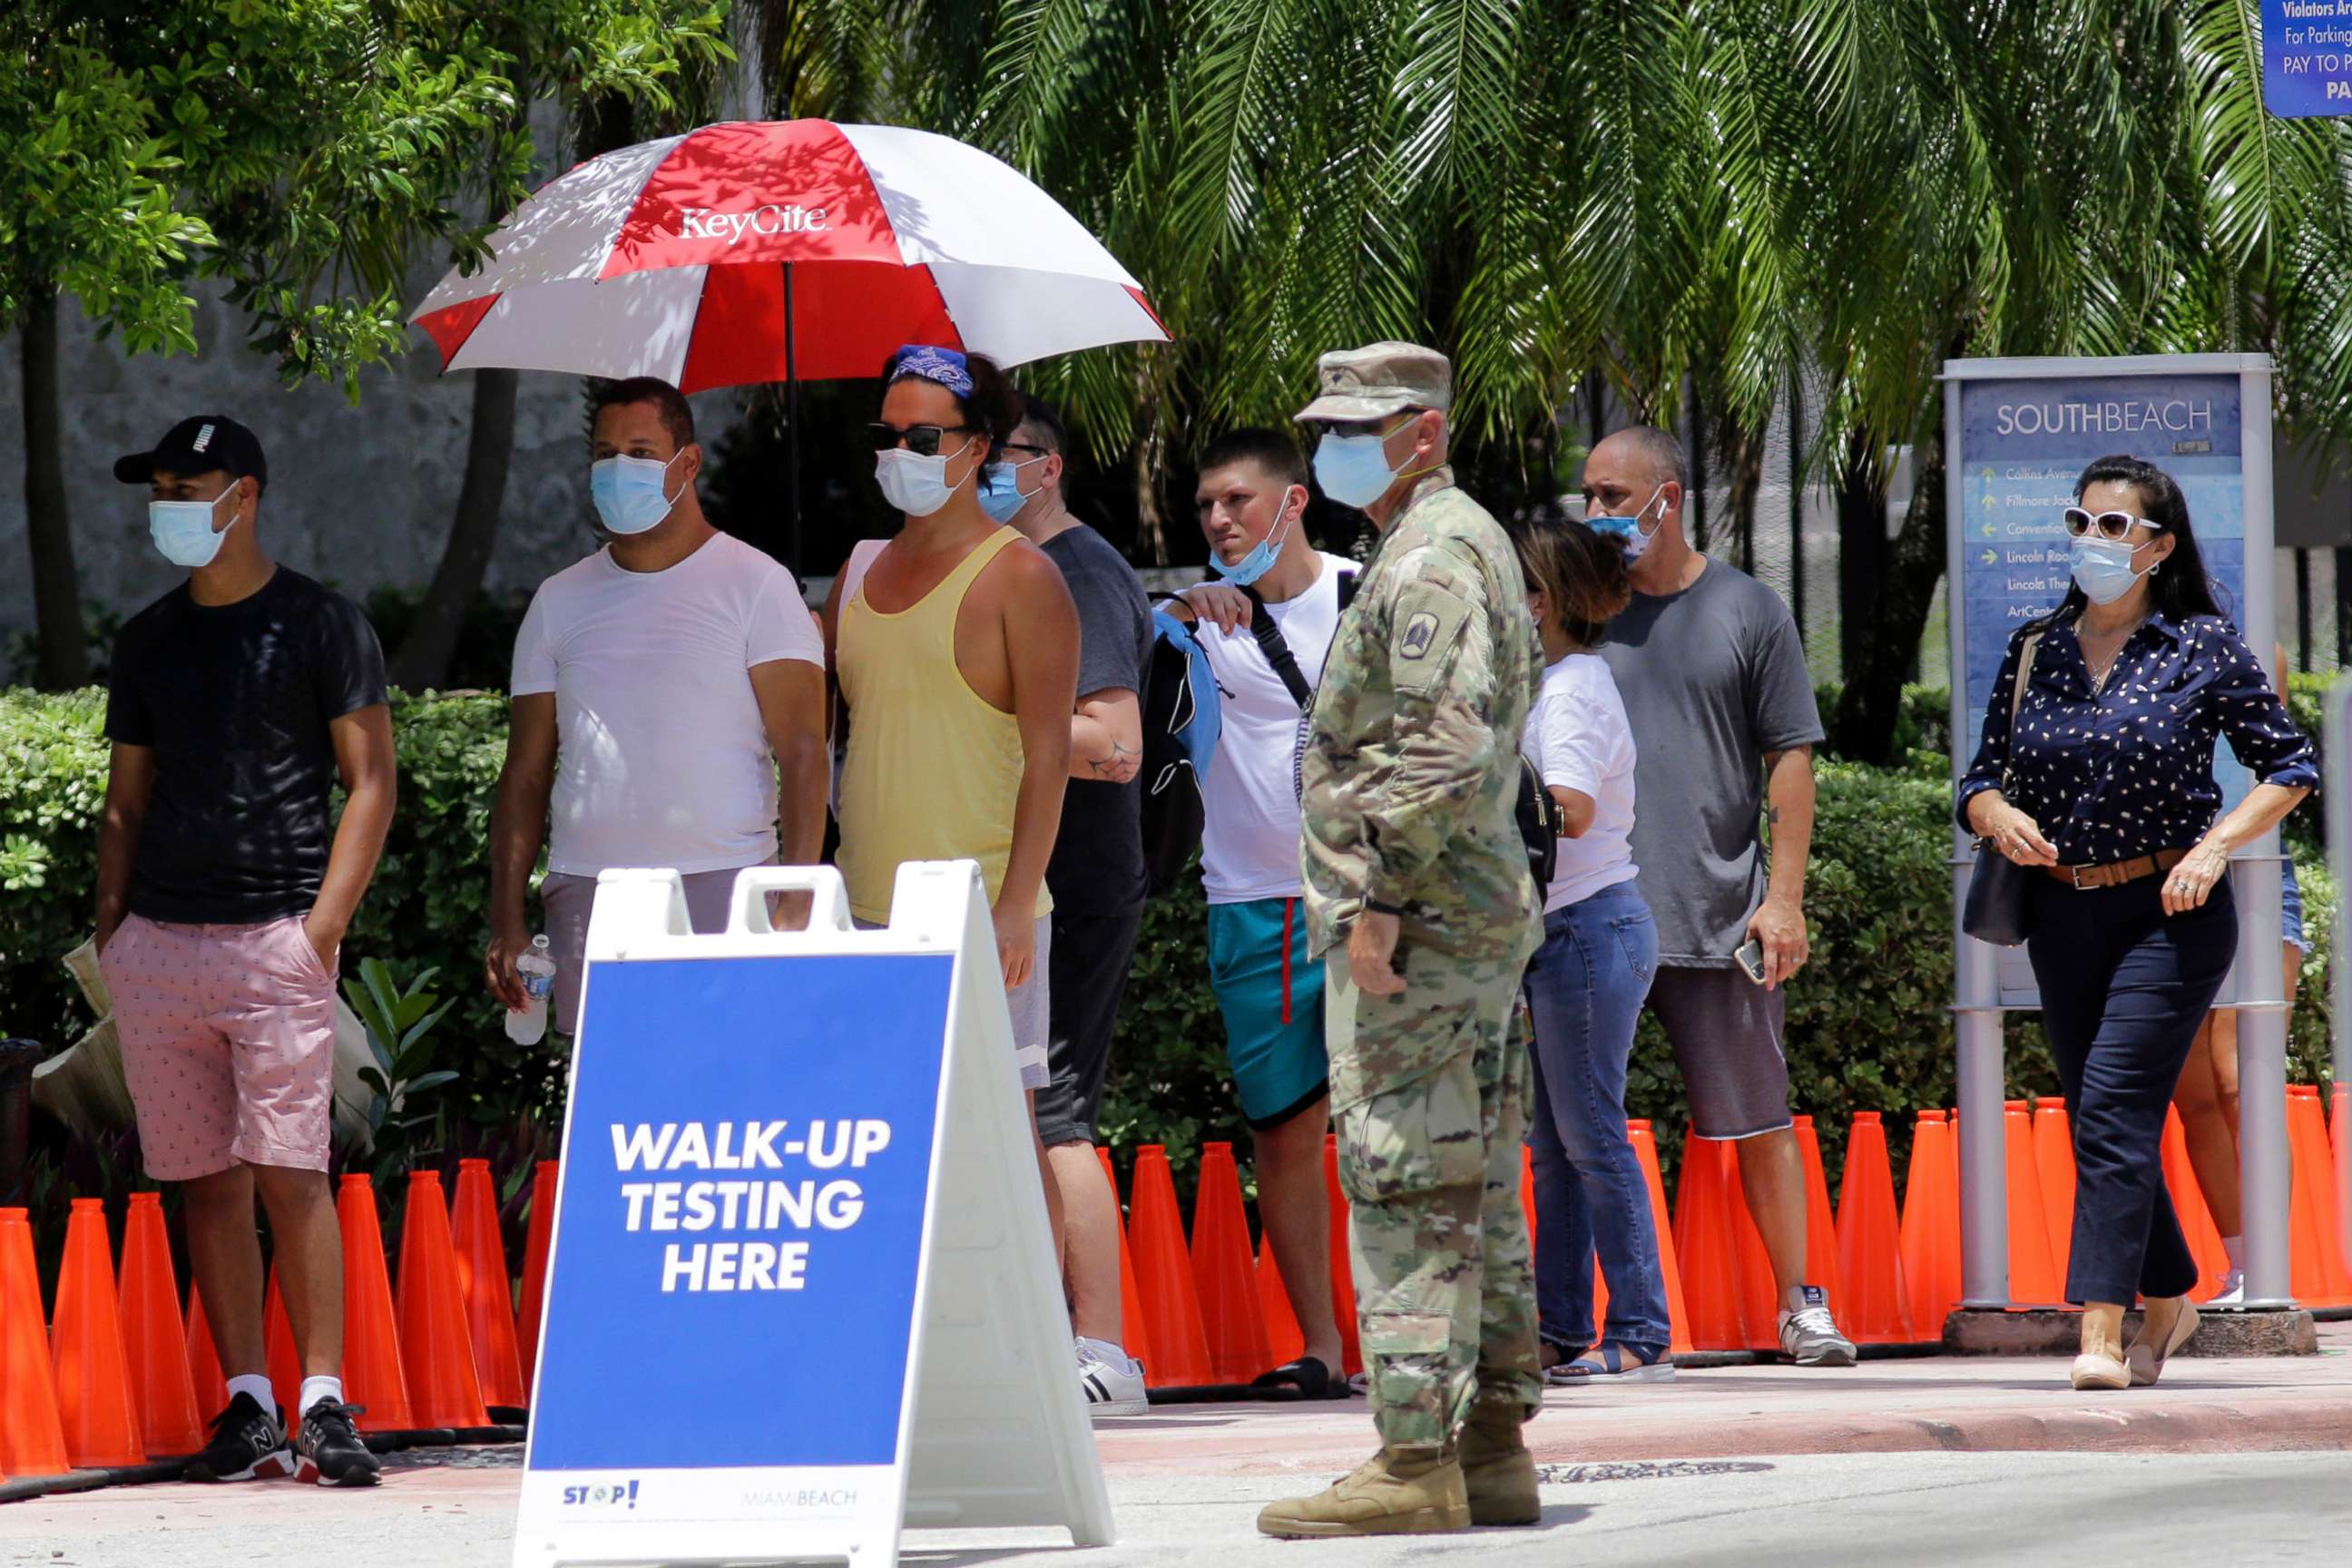 PHOTO: People wait in line at a walk-up testing site for COVID-19 during the coronavirus pandemic, June 30, 2020, in Miami Beach, Fla.